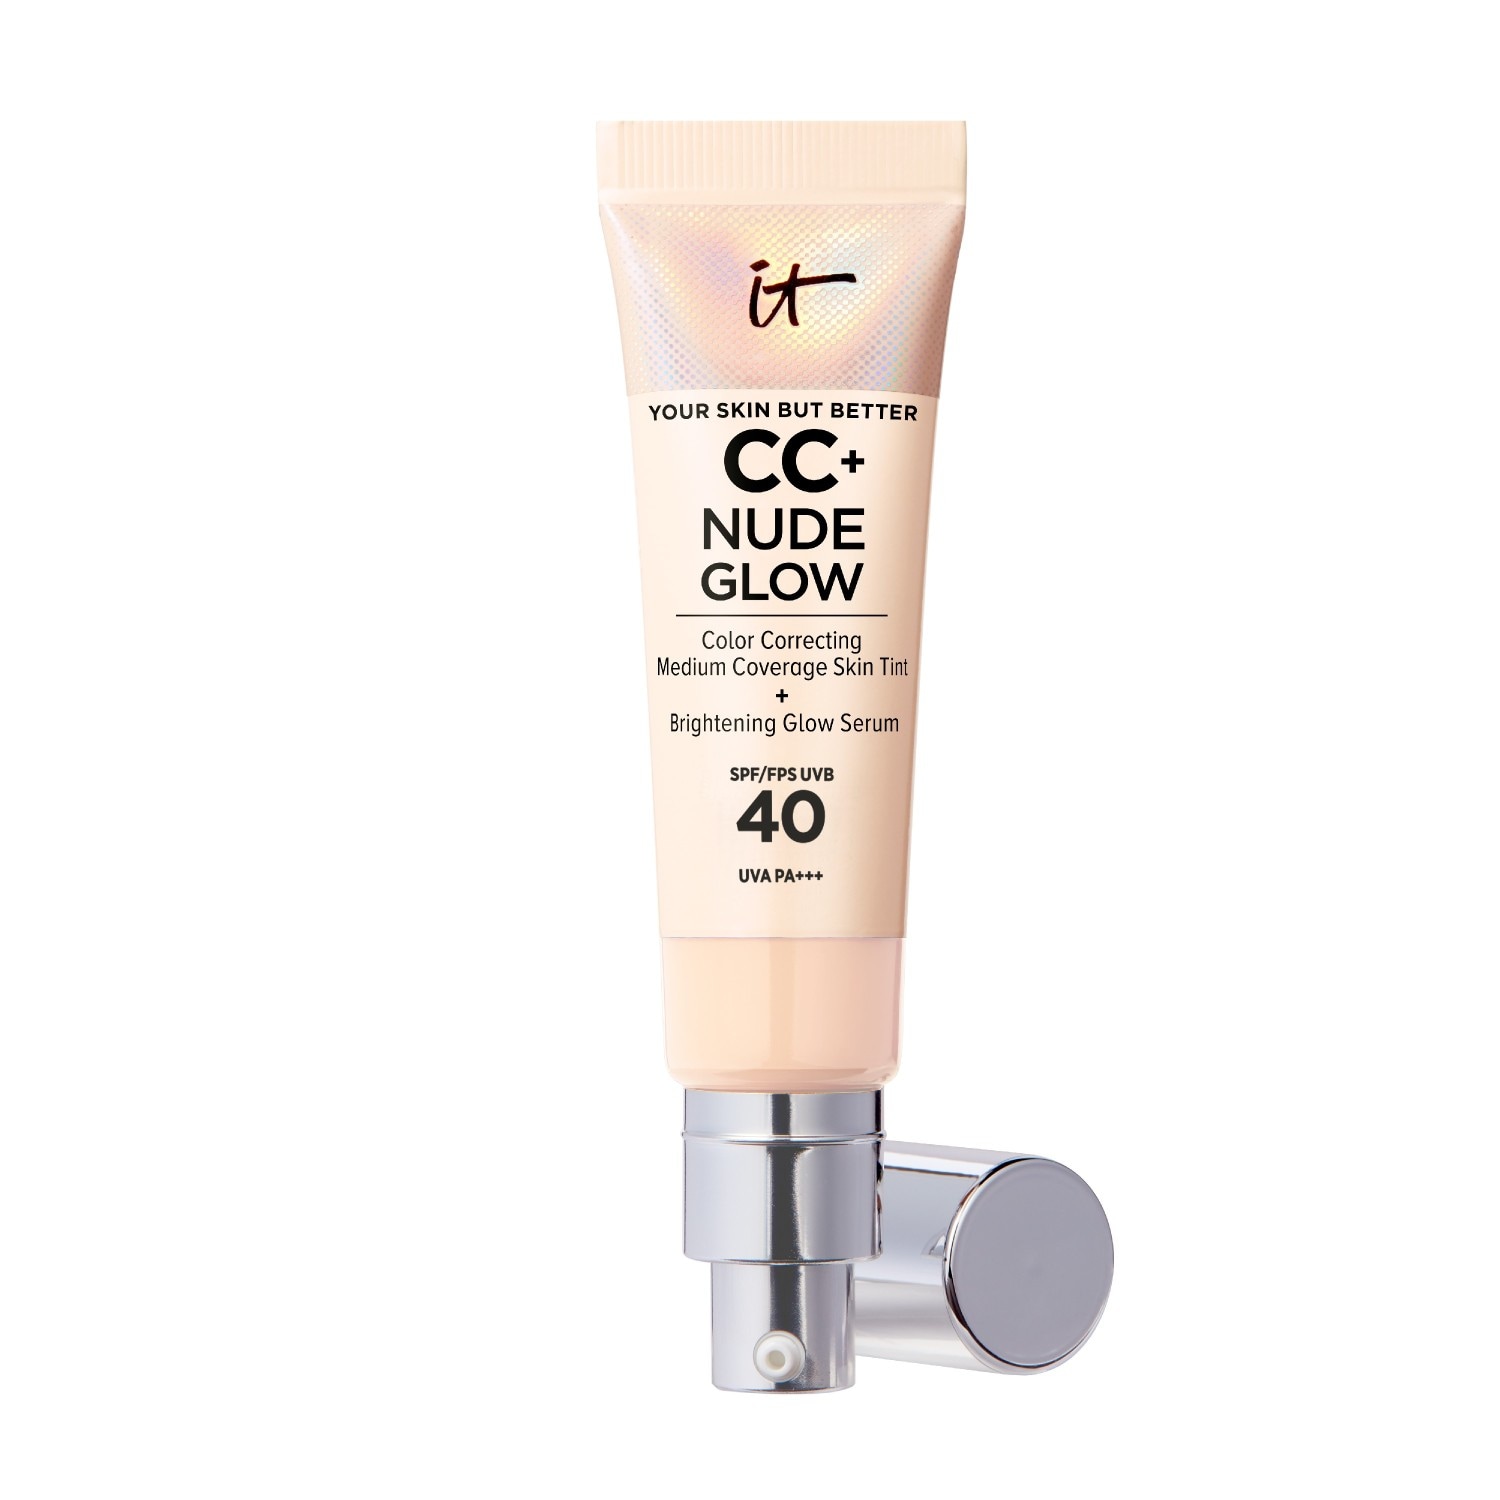 IT Cosmetics Your Skin But Better CC+ Nude Glow, Fair Light